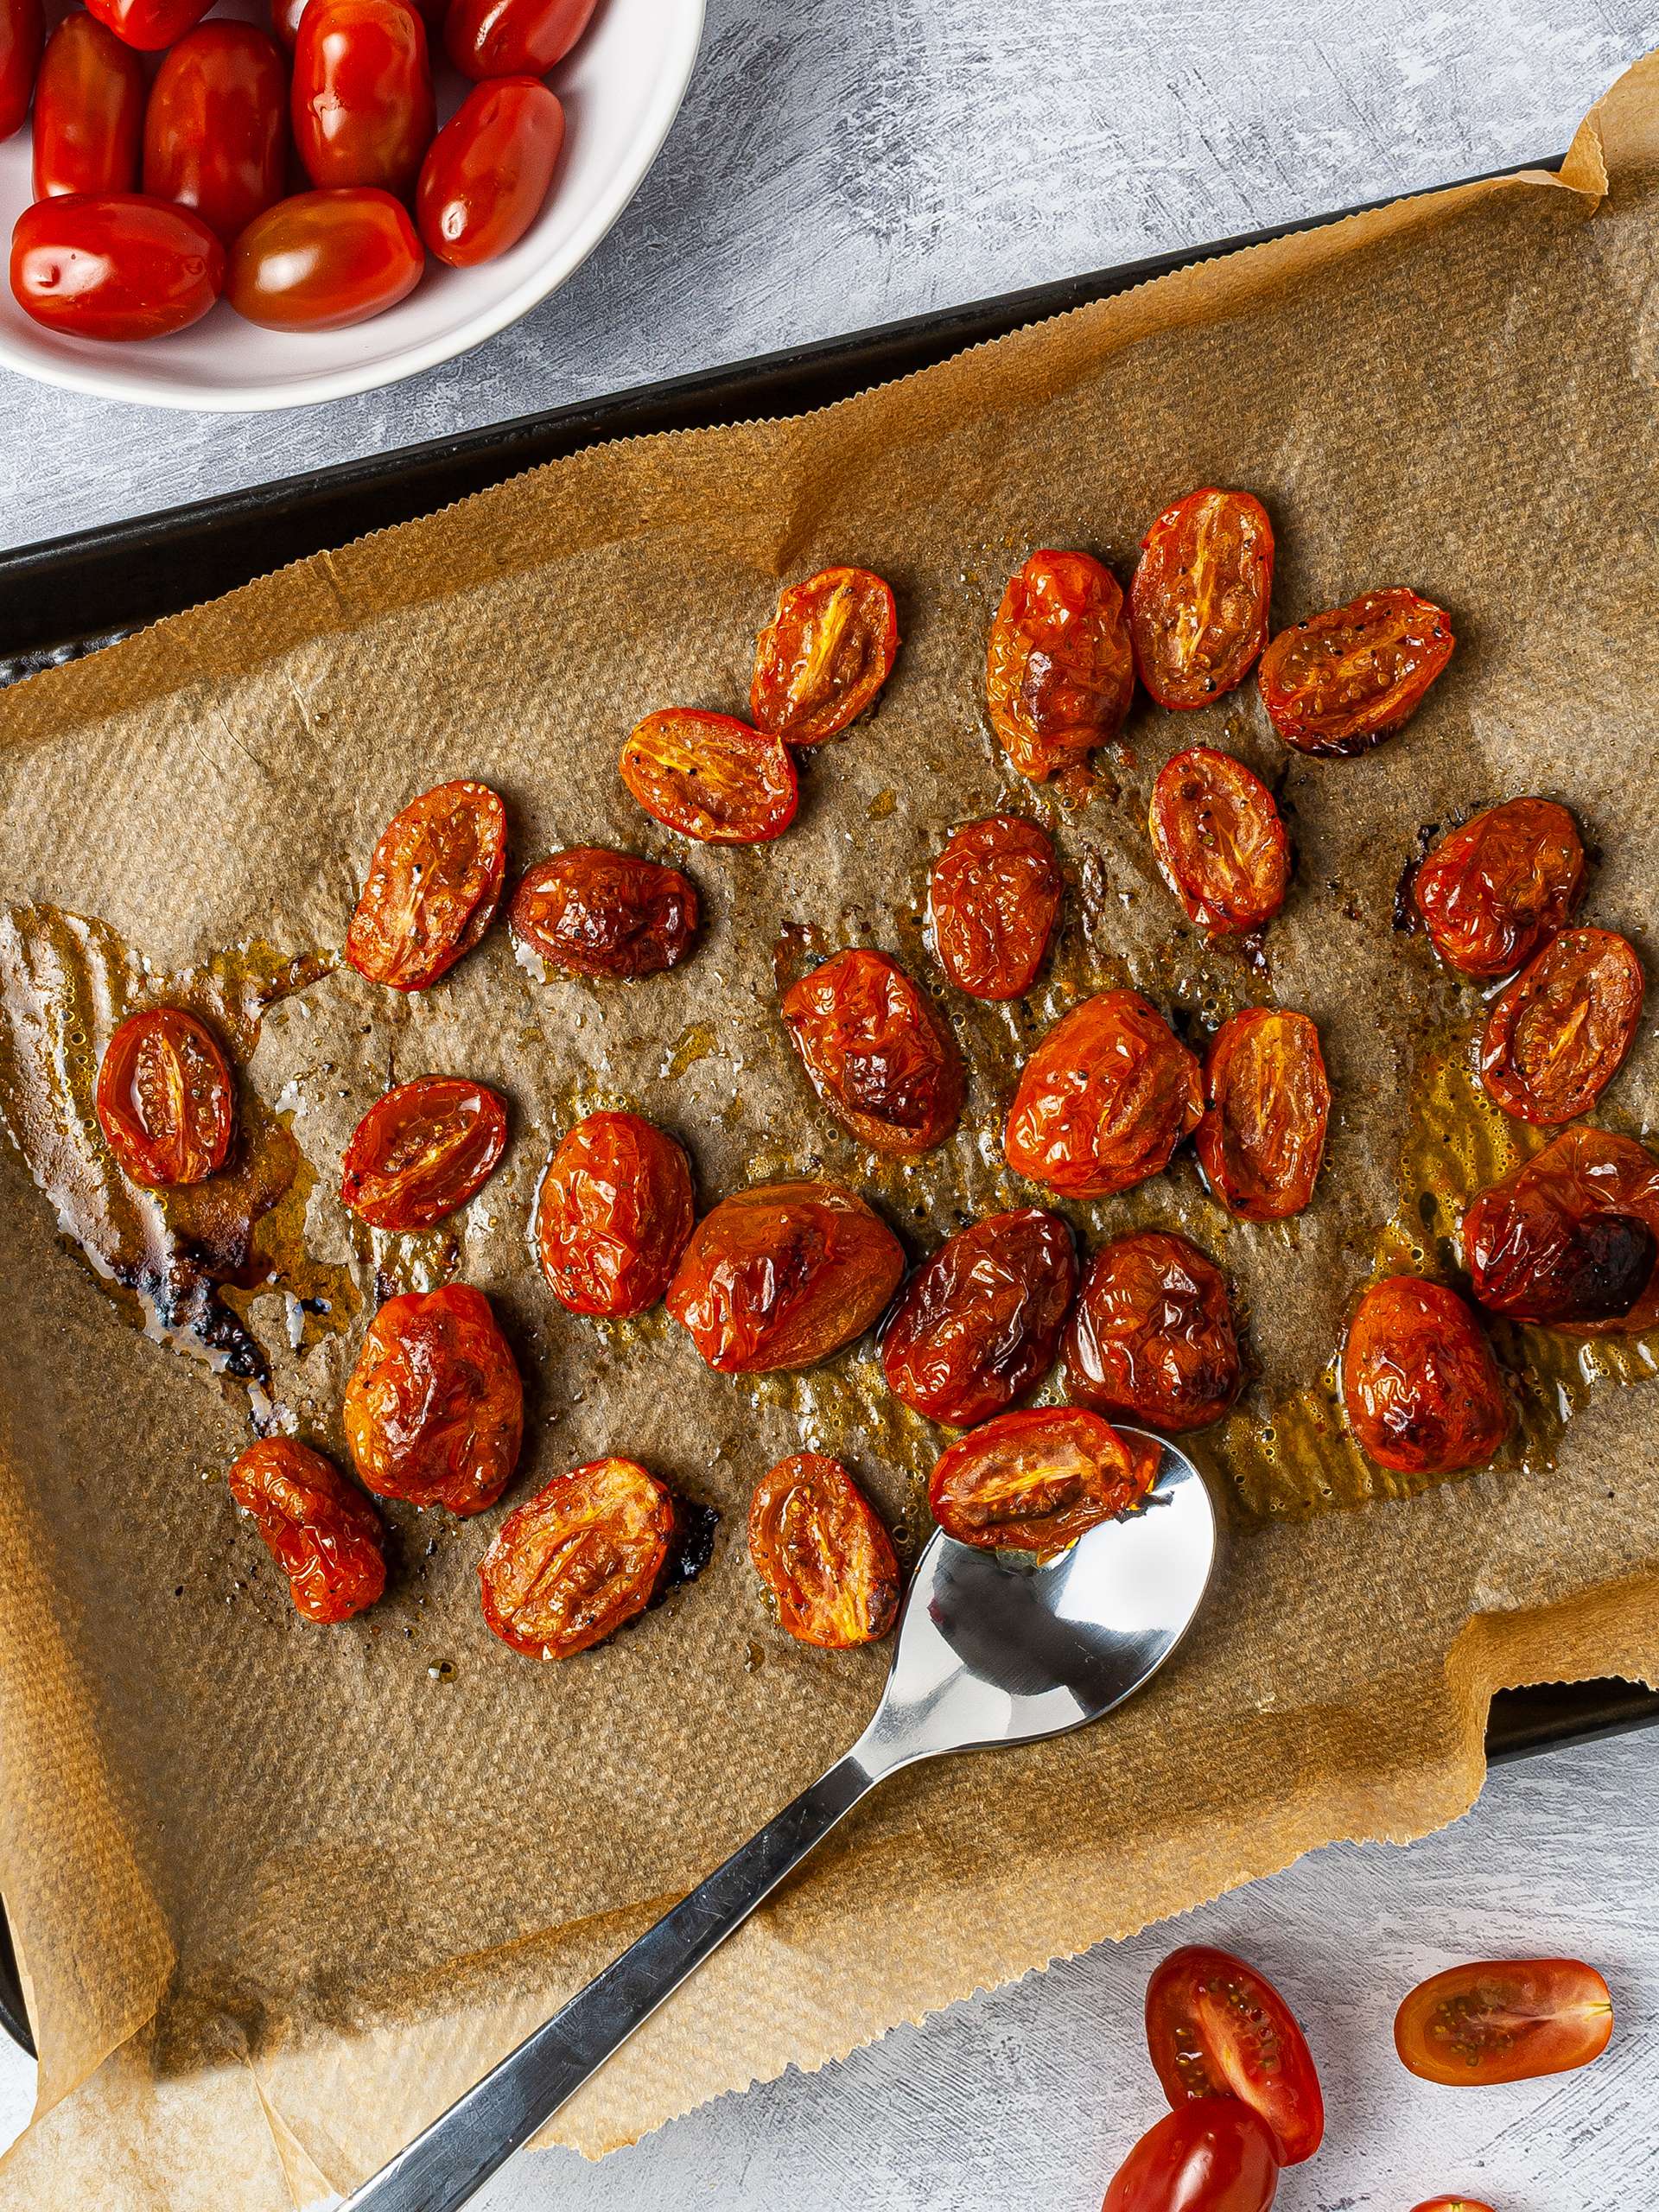 Whole and halved cherry tomatoes roasted with olive oil over a baking tray